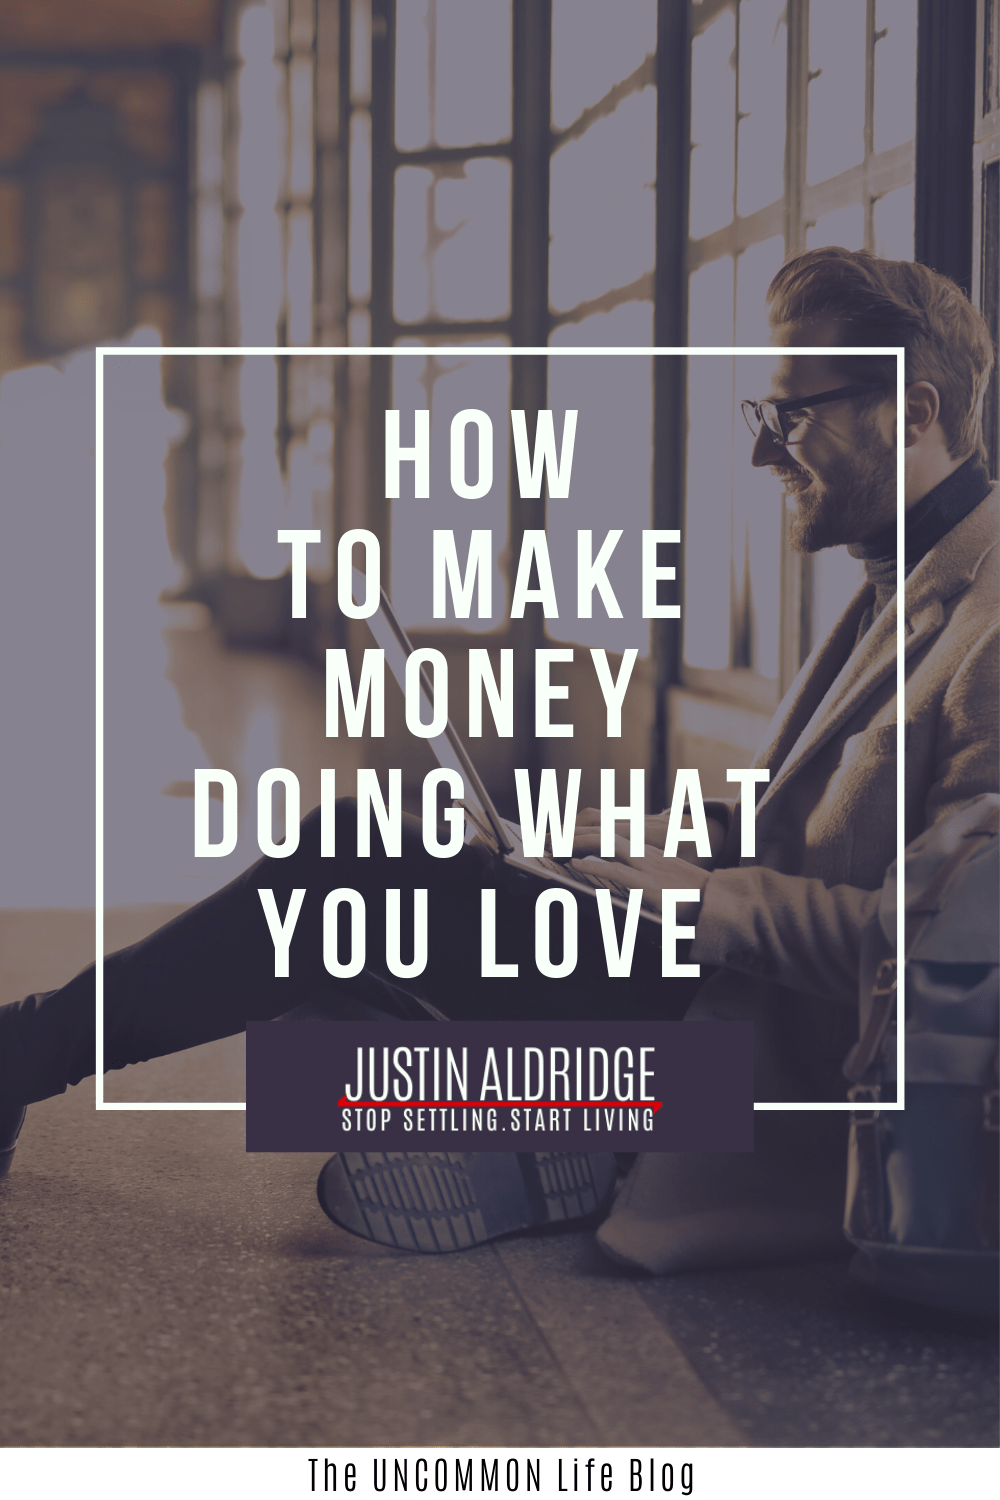 Man typing on computer in the background behind the text "How to make money doing what you love" in white font